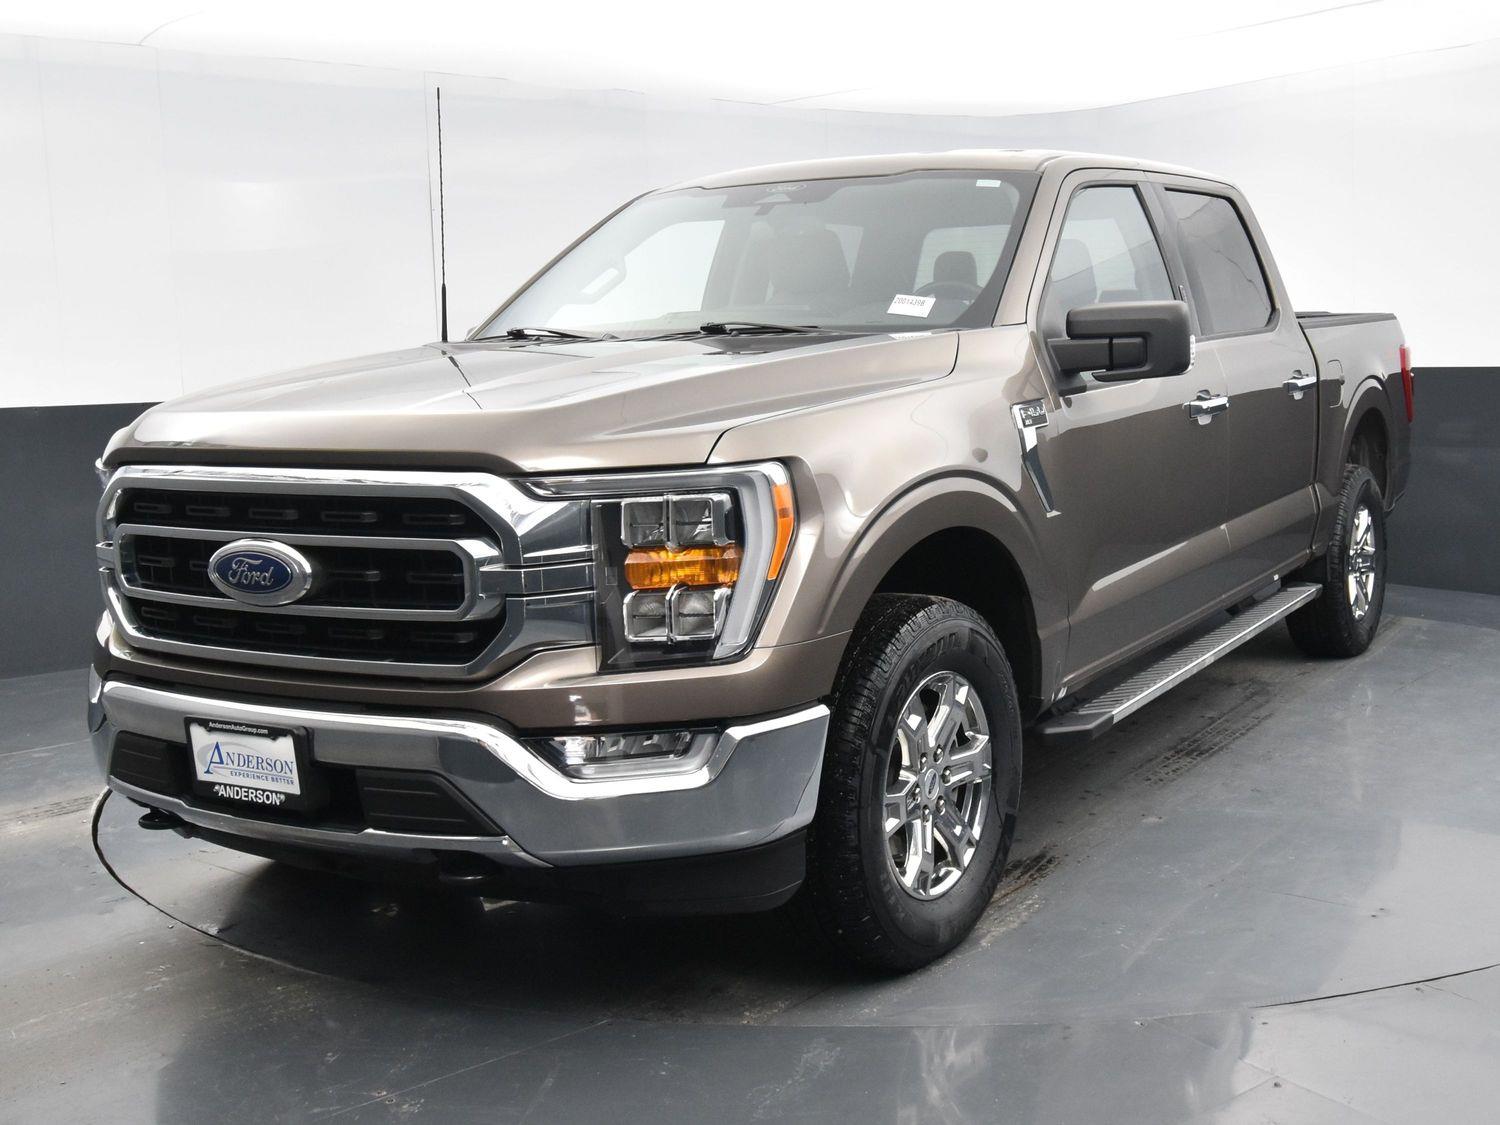 Used 2022 Ford F-150 XLT SuperCrew Cab for sale in Grand Island NE